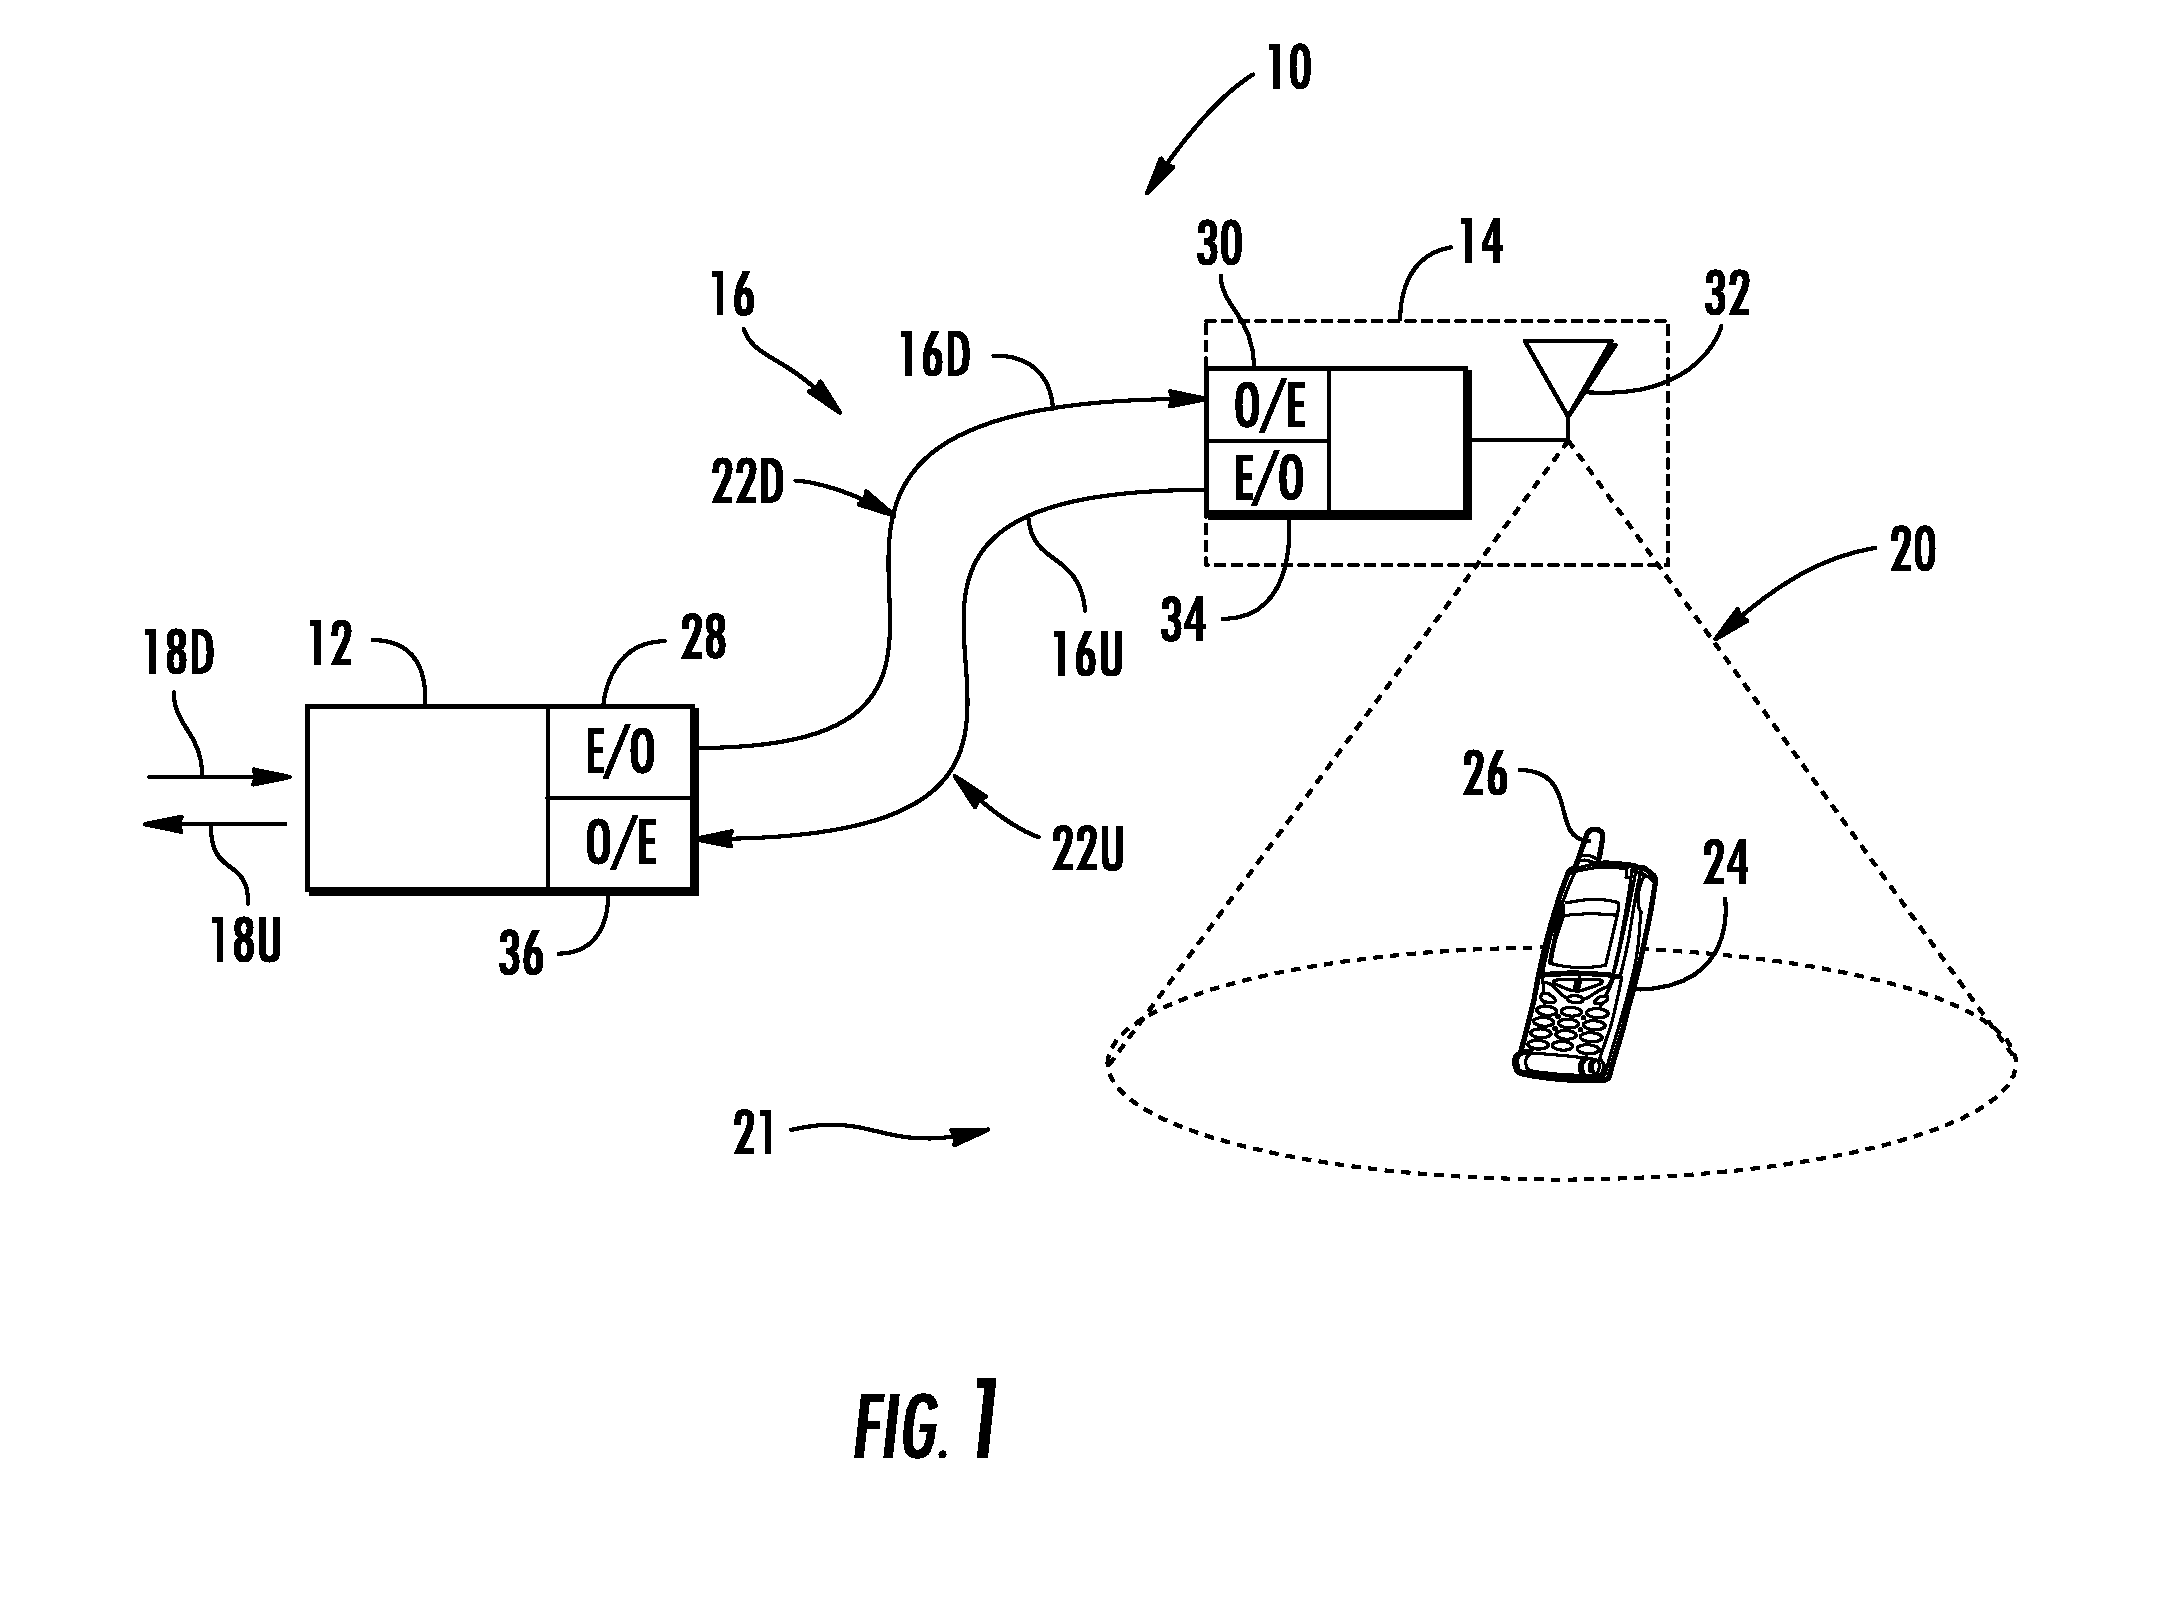 Optical fiber-based distributed communications components, systems, and methods employing wavelength division multiplexing (WDM) for enhanced upgradability